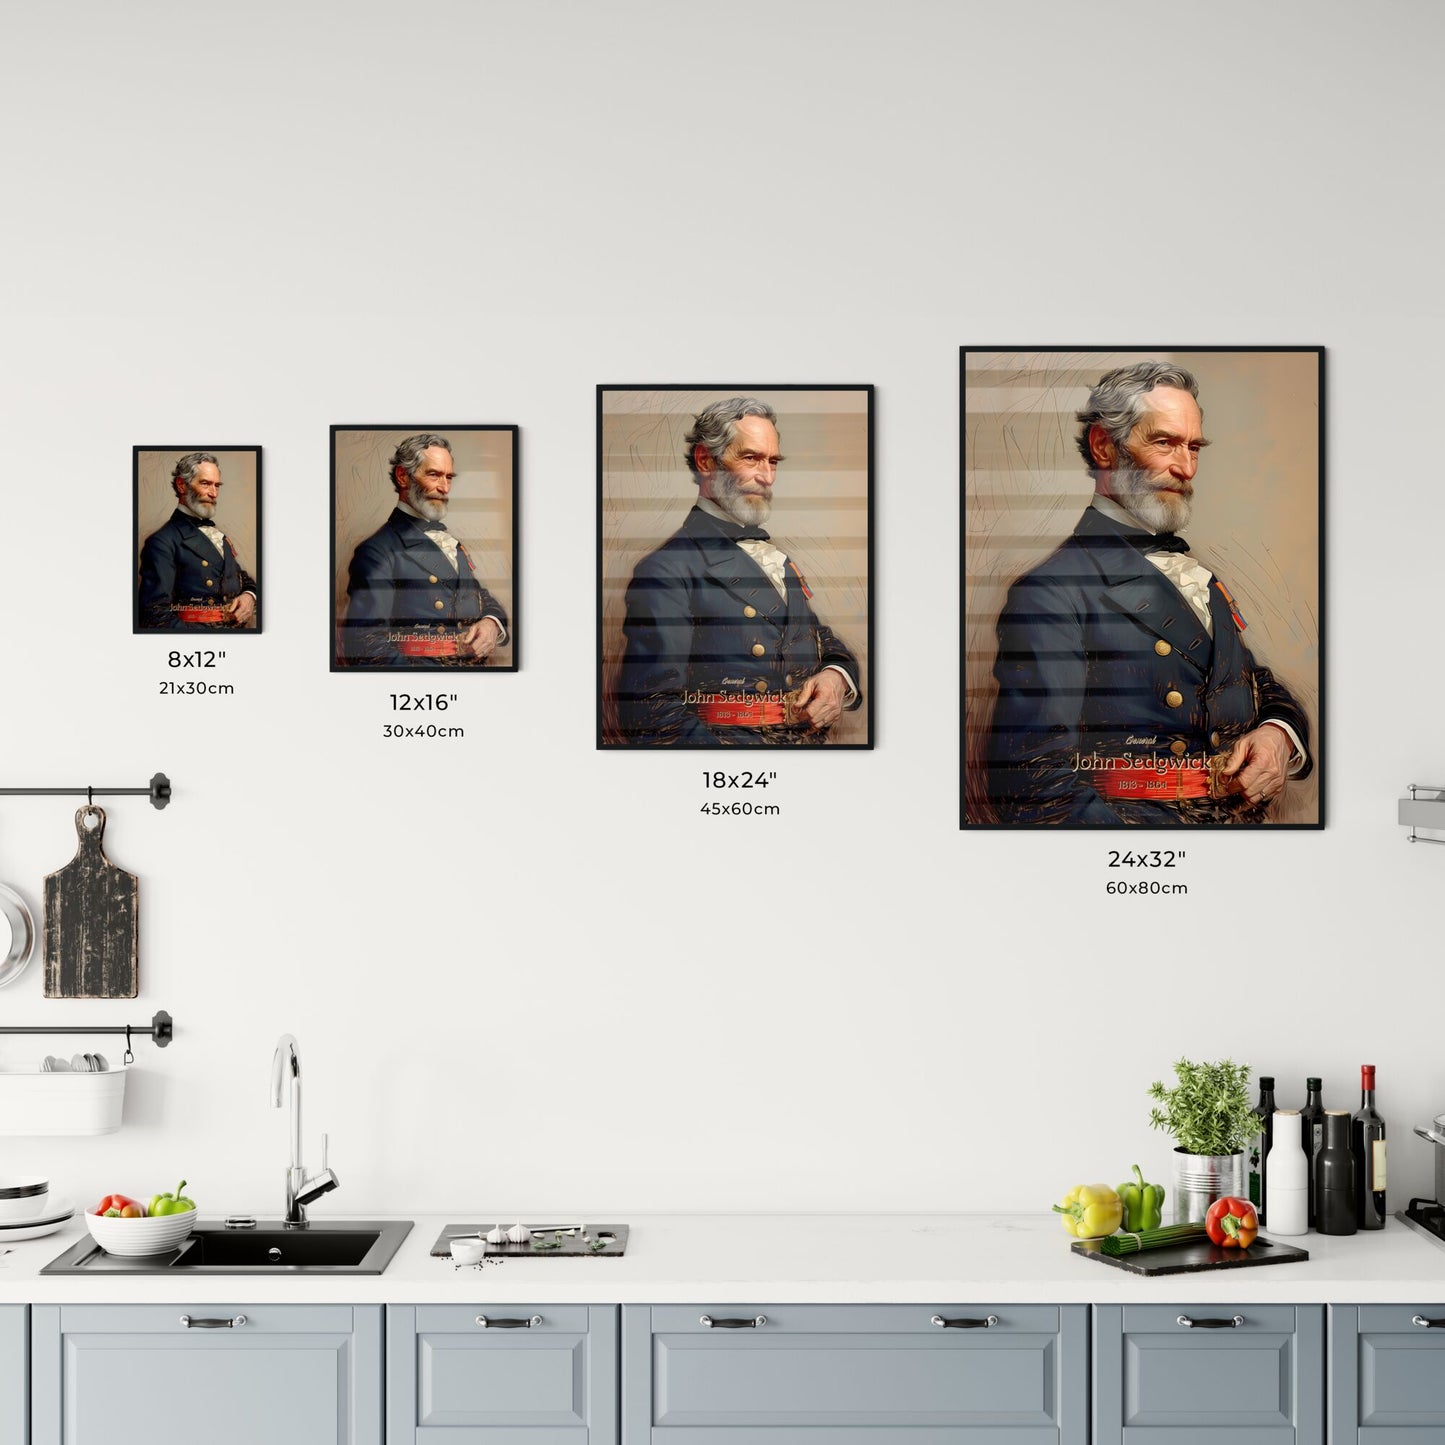 General, John Sedgwick, 1813 - 1864, A Poster of a man in a military uniform Default Title